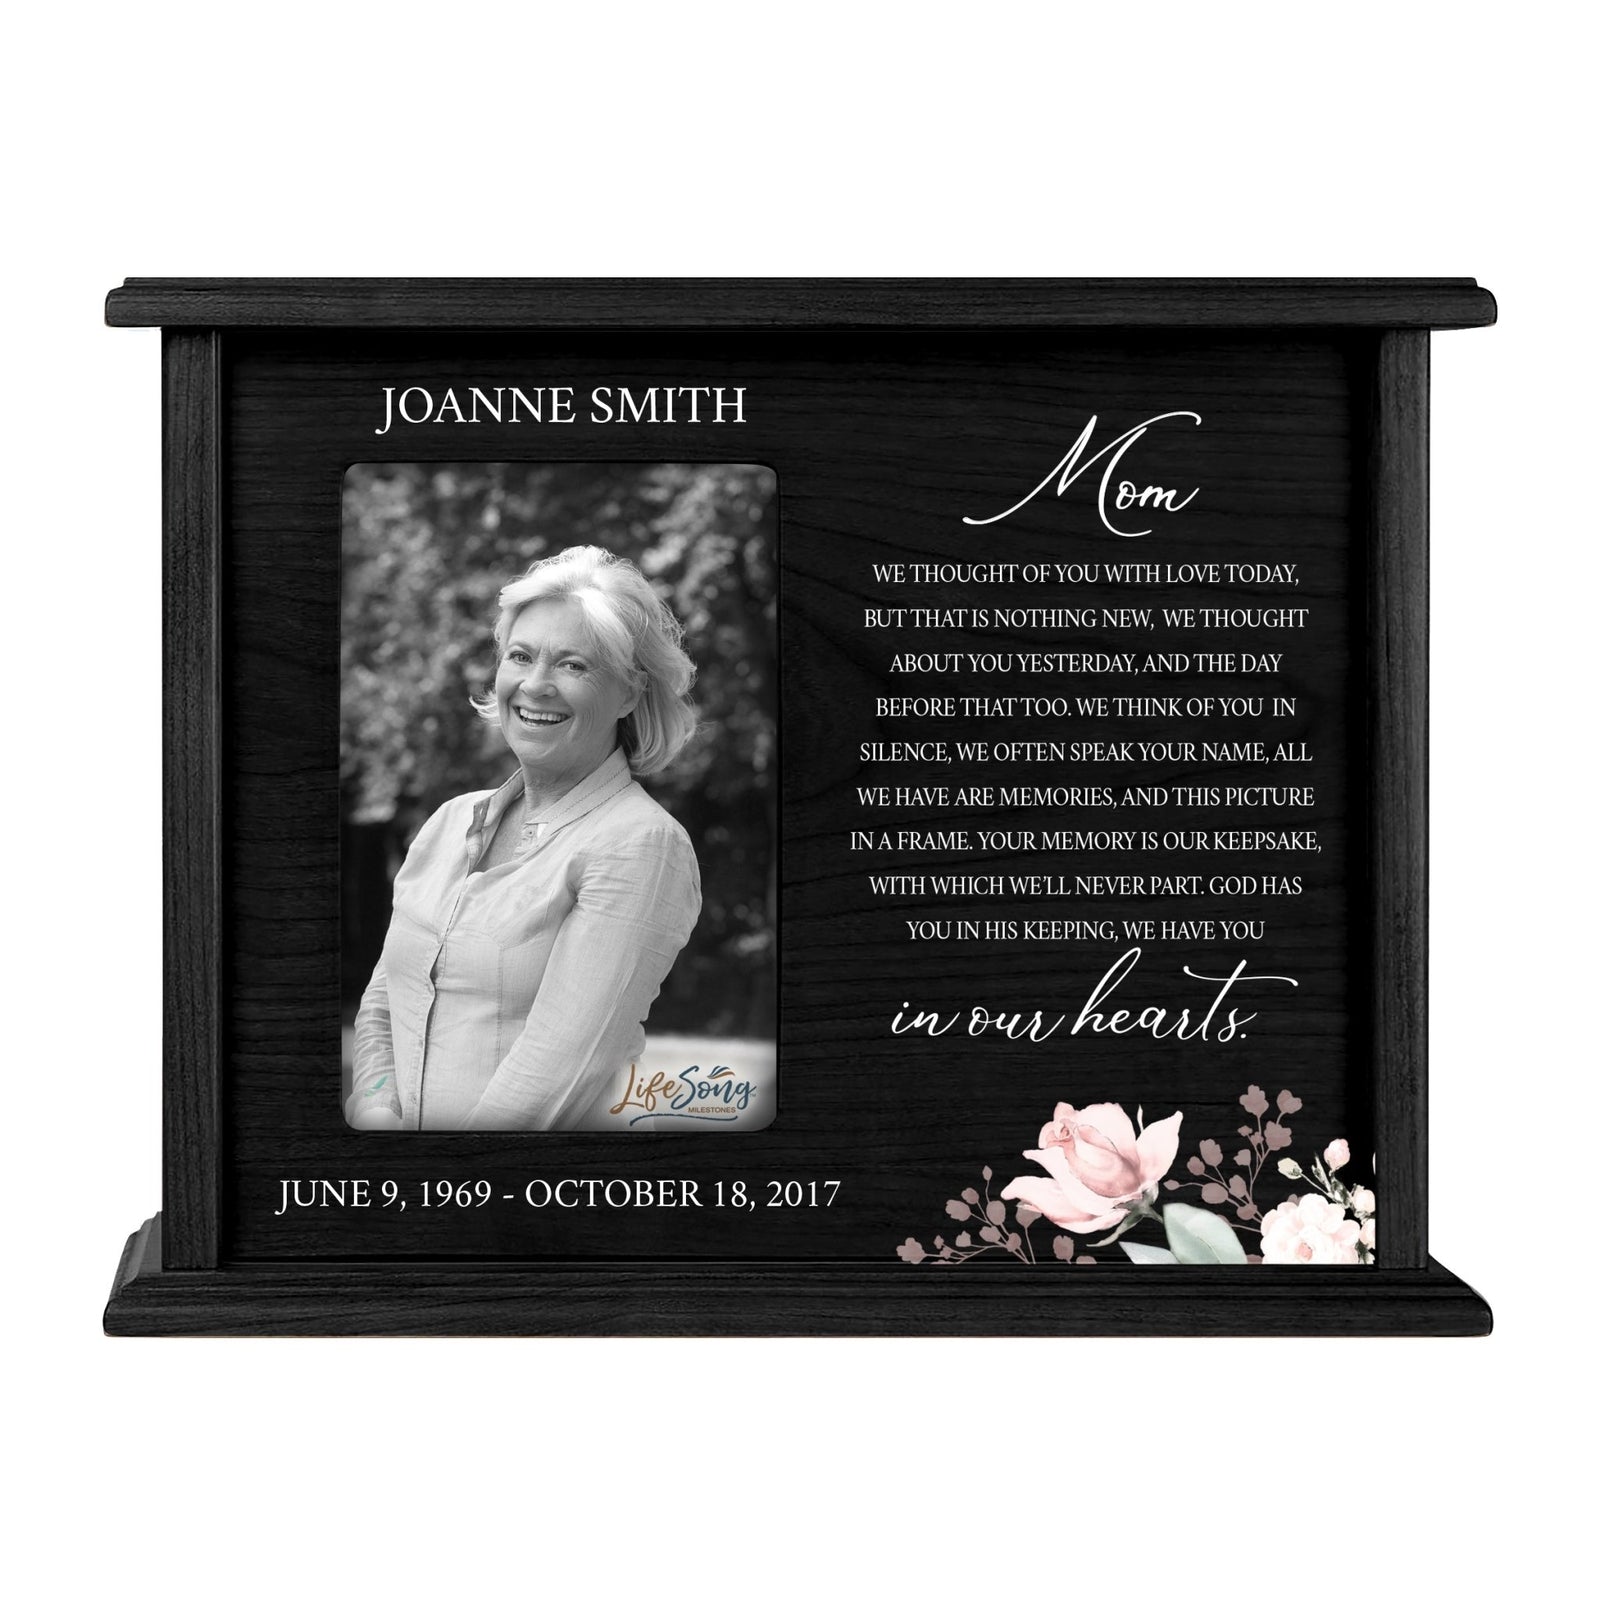 Personalized Memorial Photo Cremation Urn Boxfor Human Ashes - We Thought Of You - LifeSong Milestones